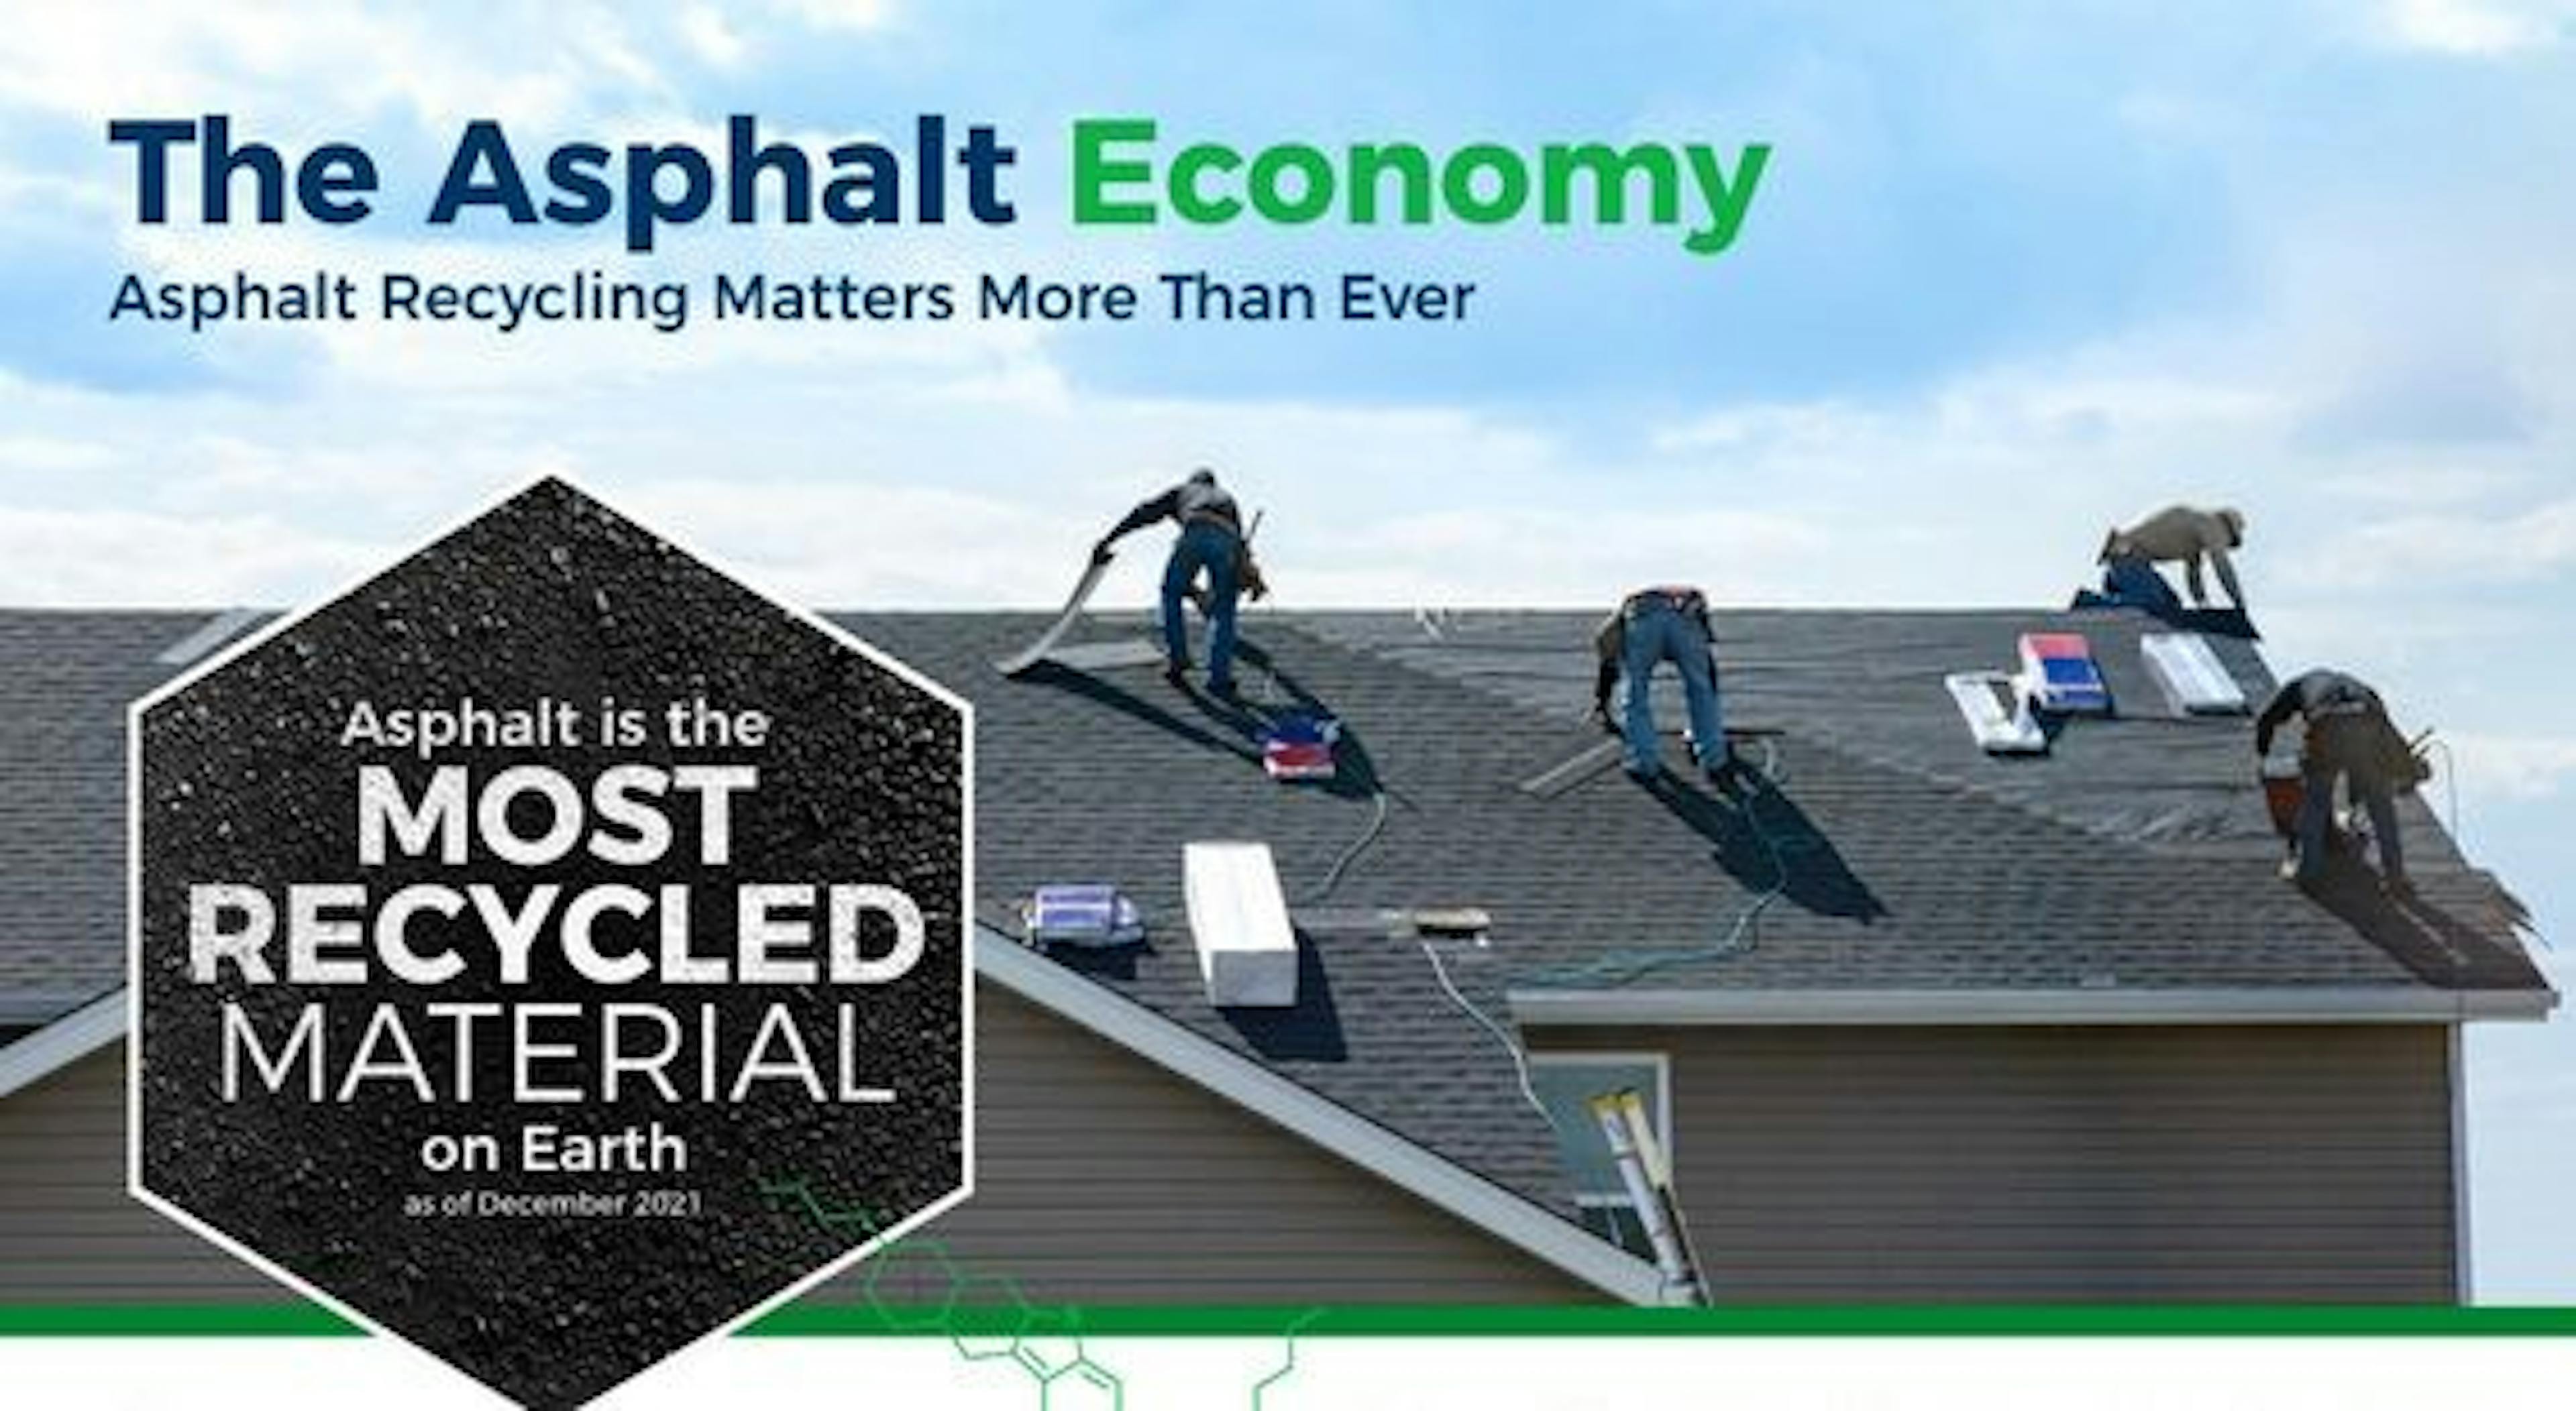 /hacking-the-asphalt-economy-an-infographic feature image